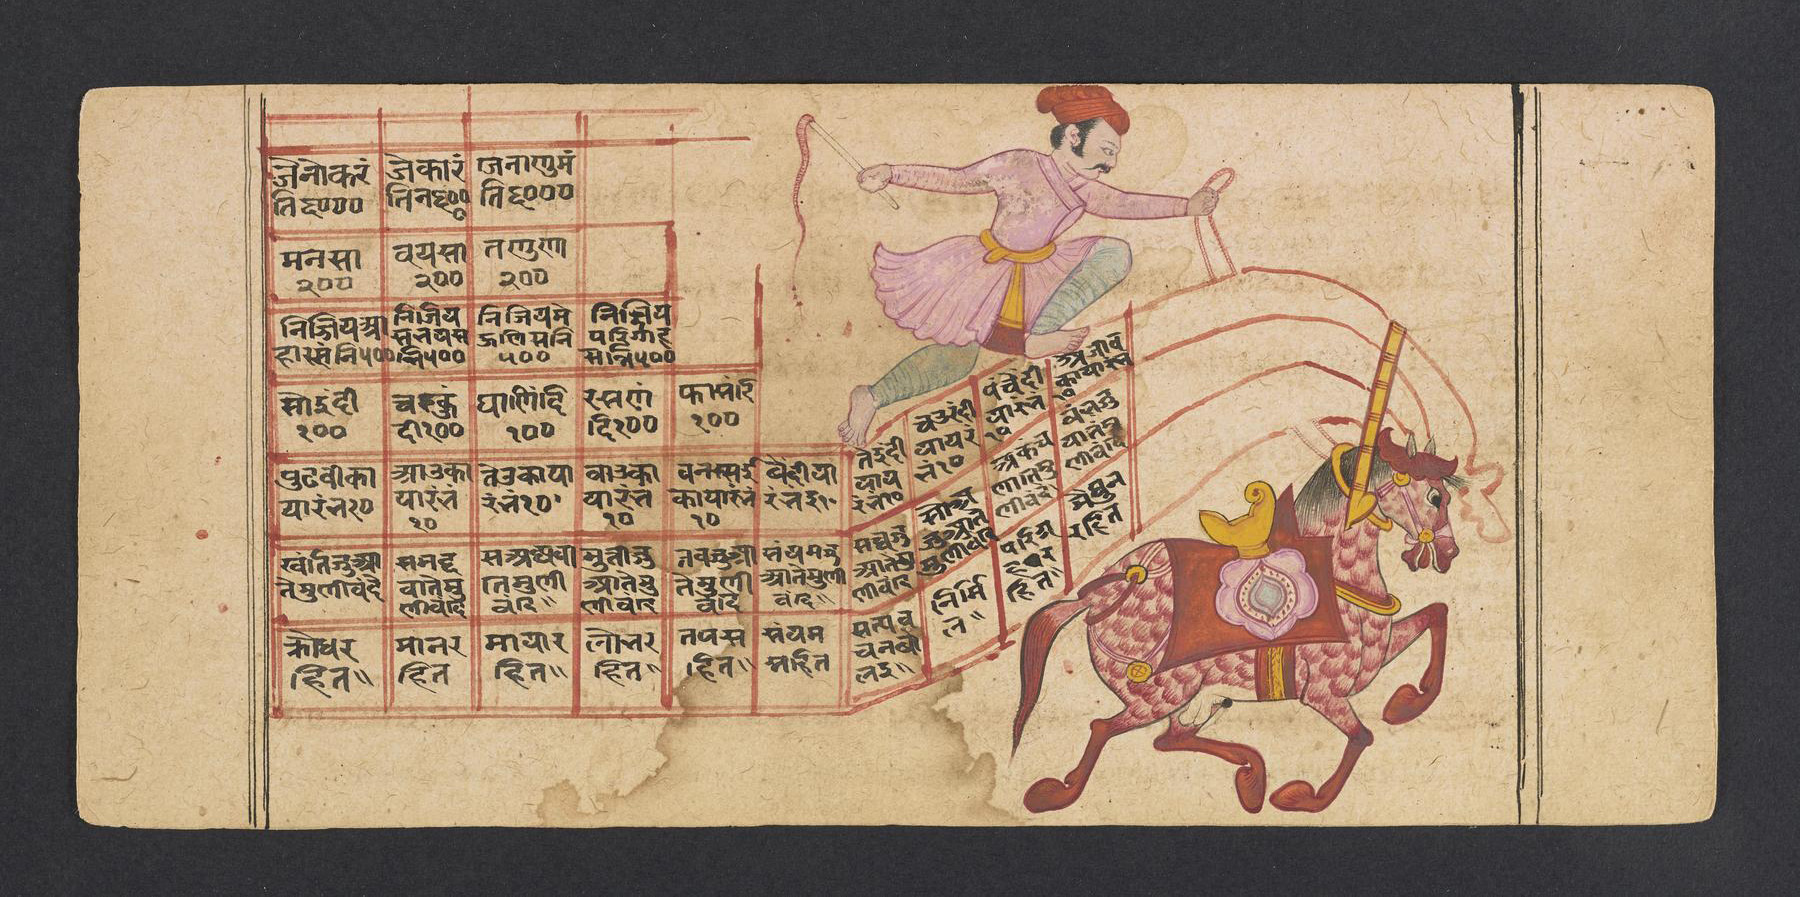 fol. 77r from Ms. Indic 26